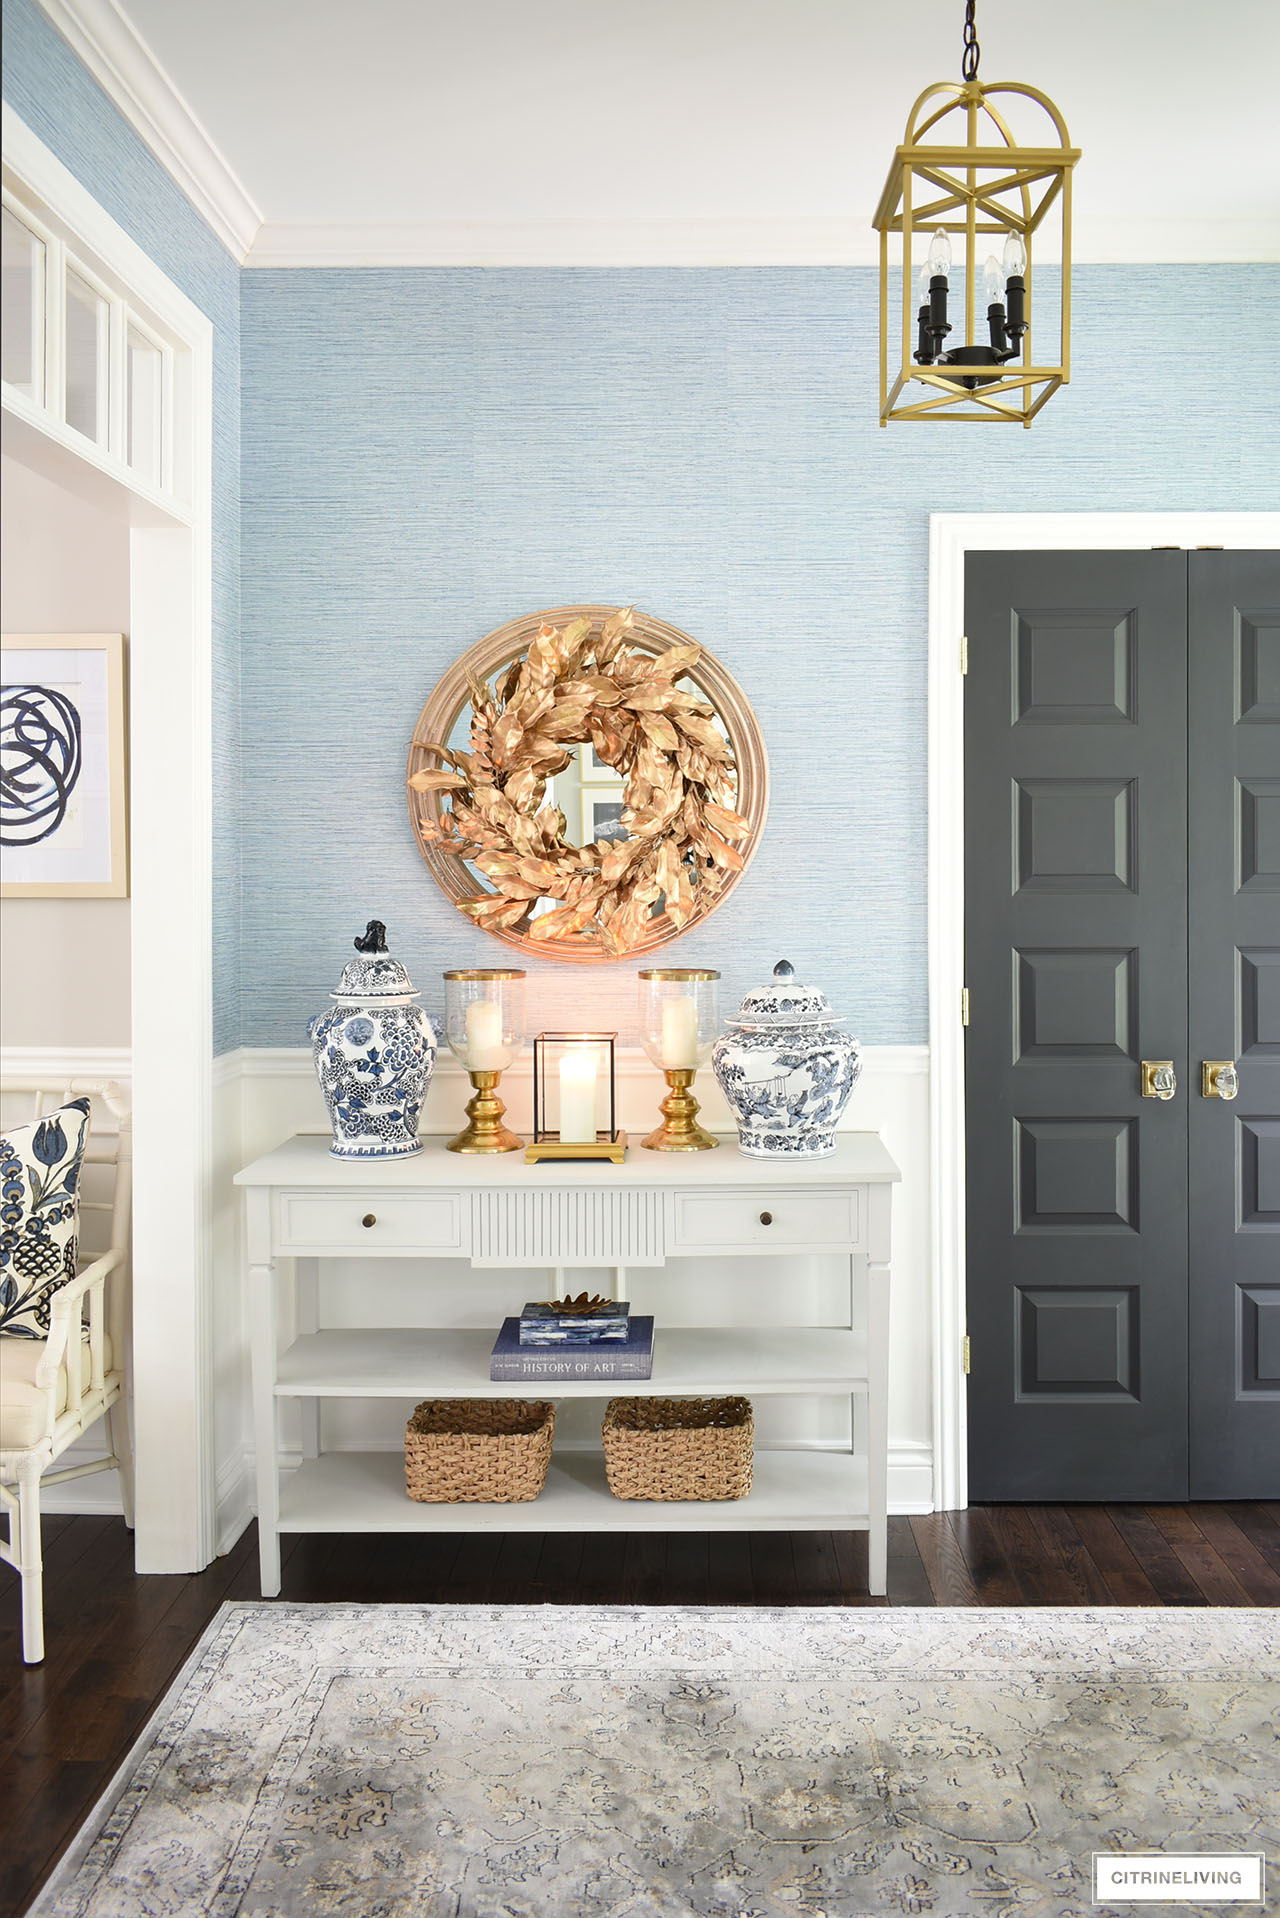 Entryway table decorated for fall with a chic gold wreath, blue and white ginger jars, gold candleholders, baskets, book and box in timeless blue is a simple take on the season.